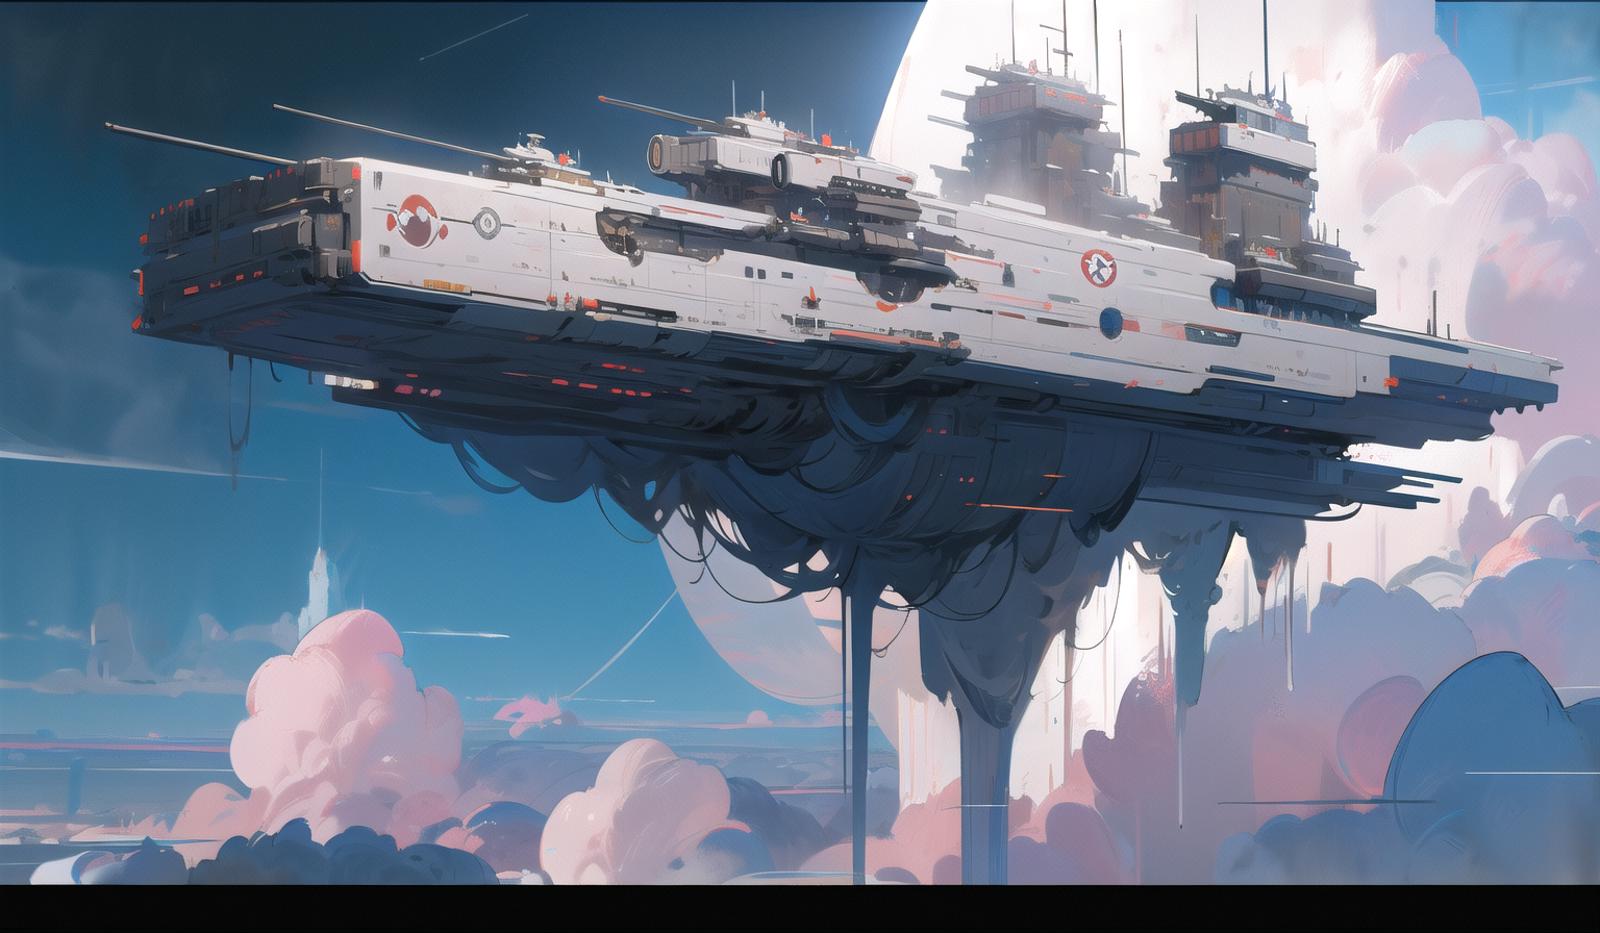 [LoRA] Flying Warship / 装甲空母 Concept (With dropout & noise version) image by L_A_X